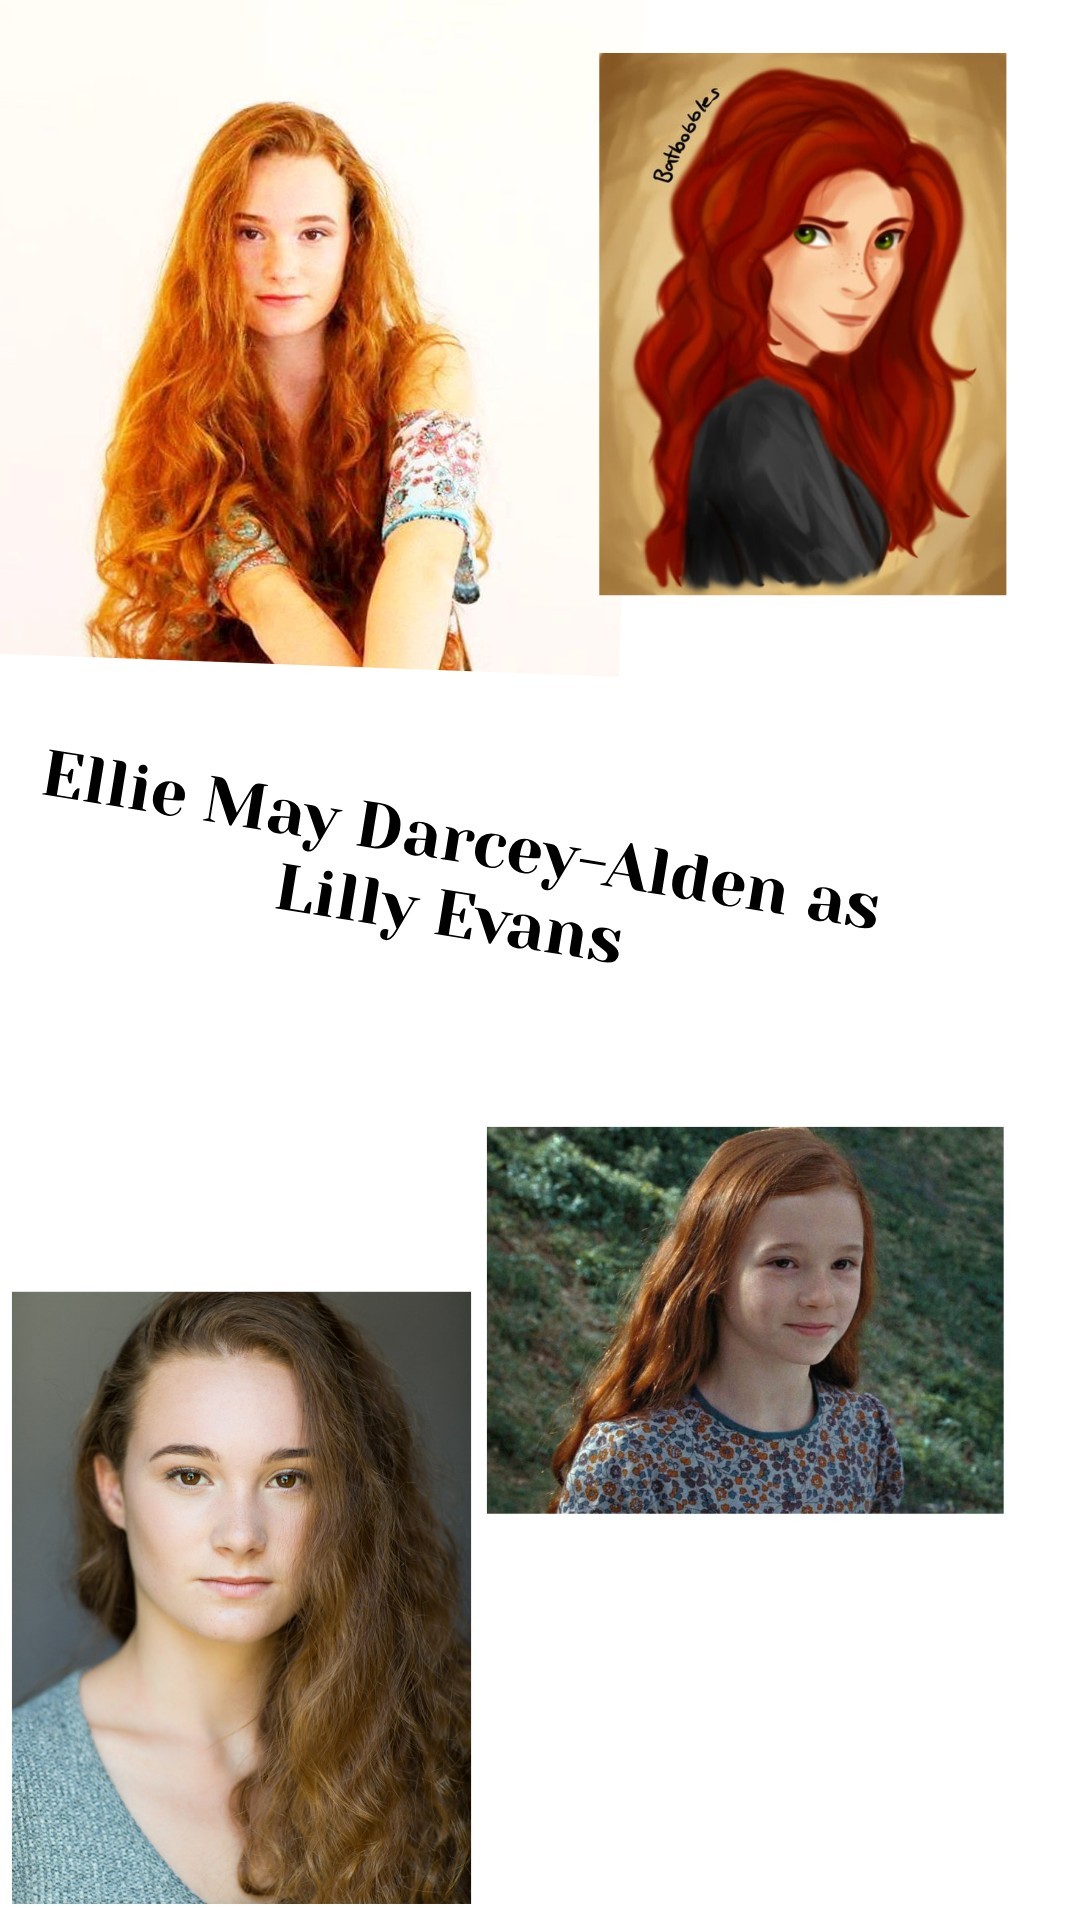 Ellie May Darcey-Alden as
Lilly Evans